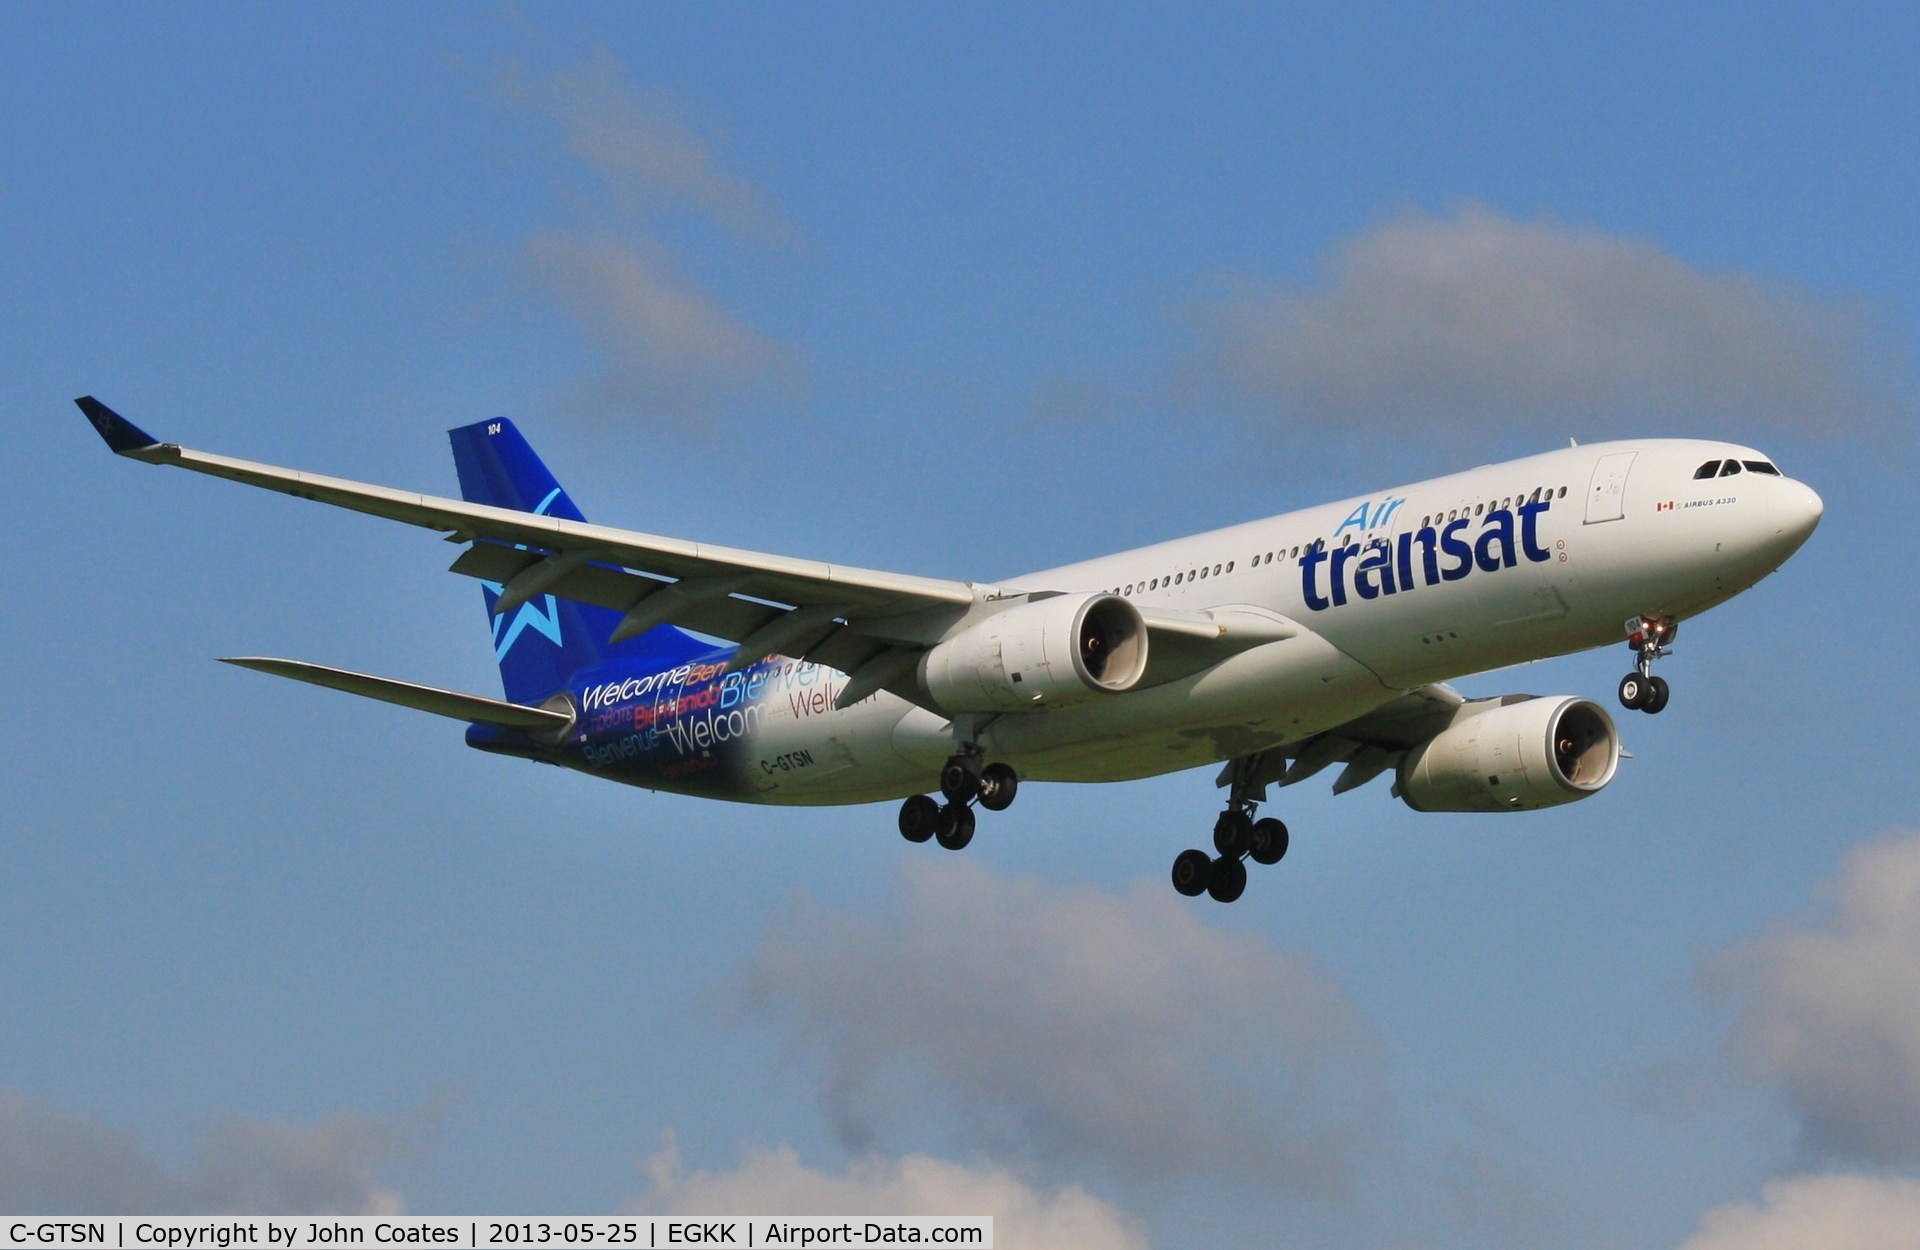 C-GTSN, 2000 Airbus A330-243 C/N 369, On approach to 08R